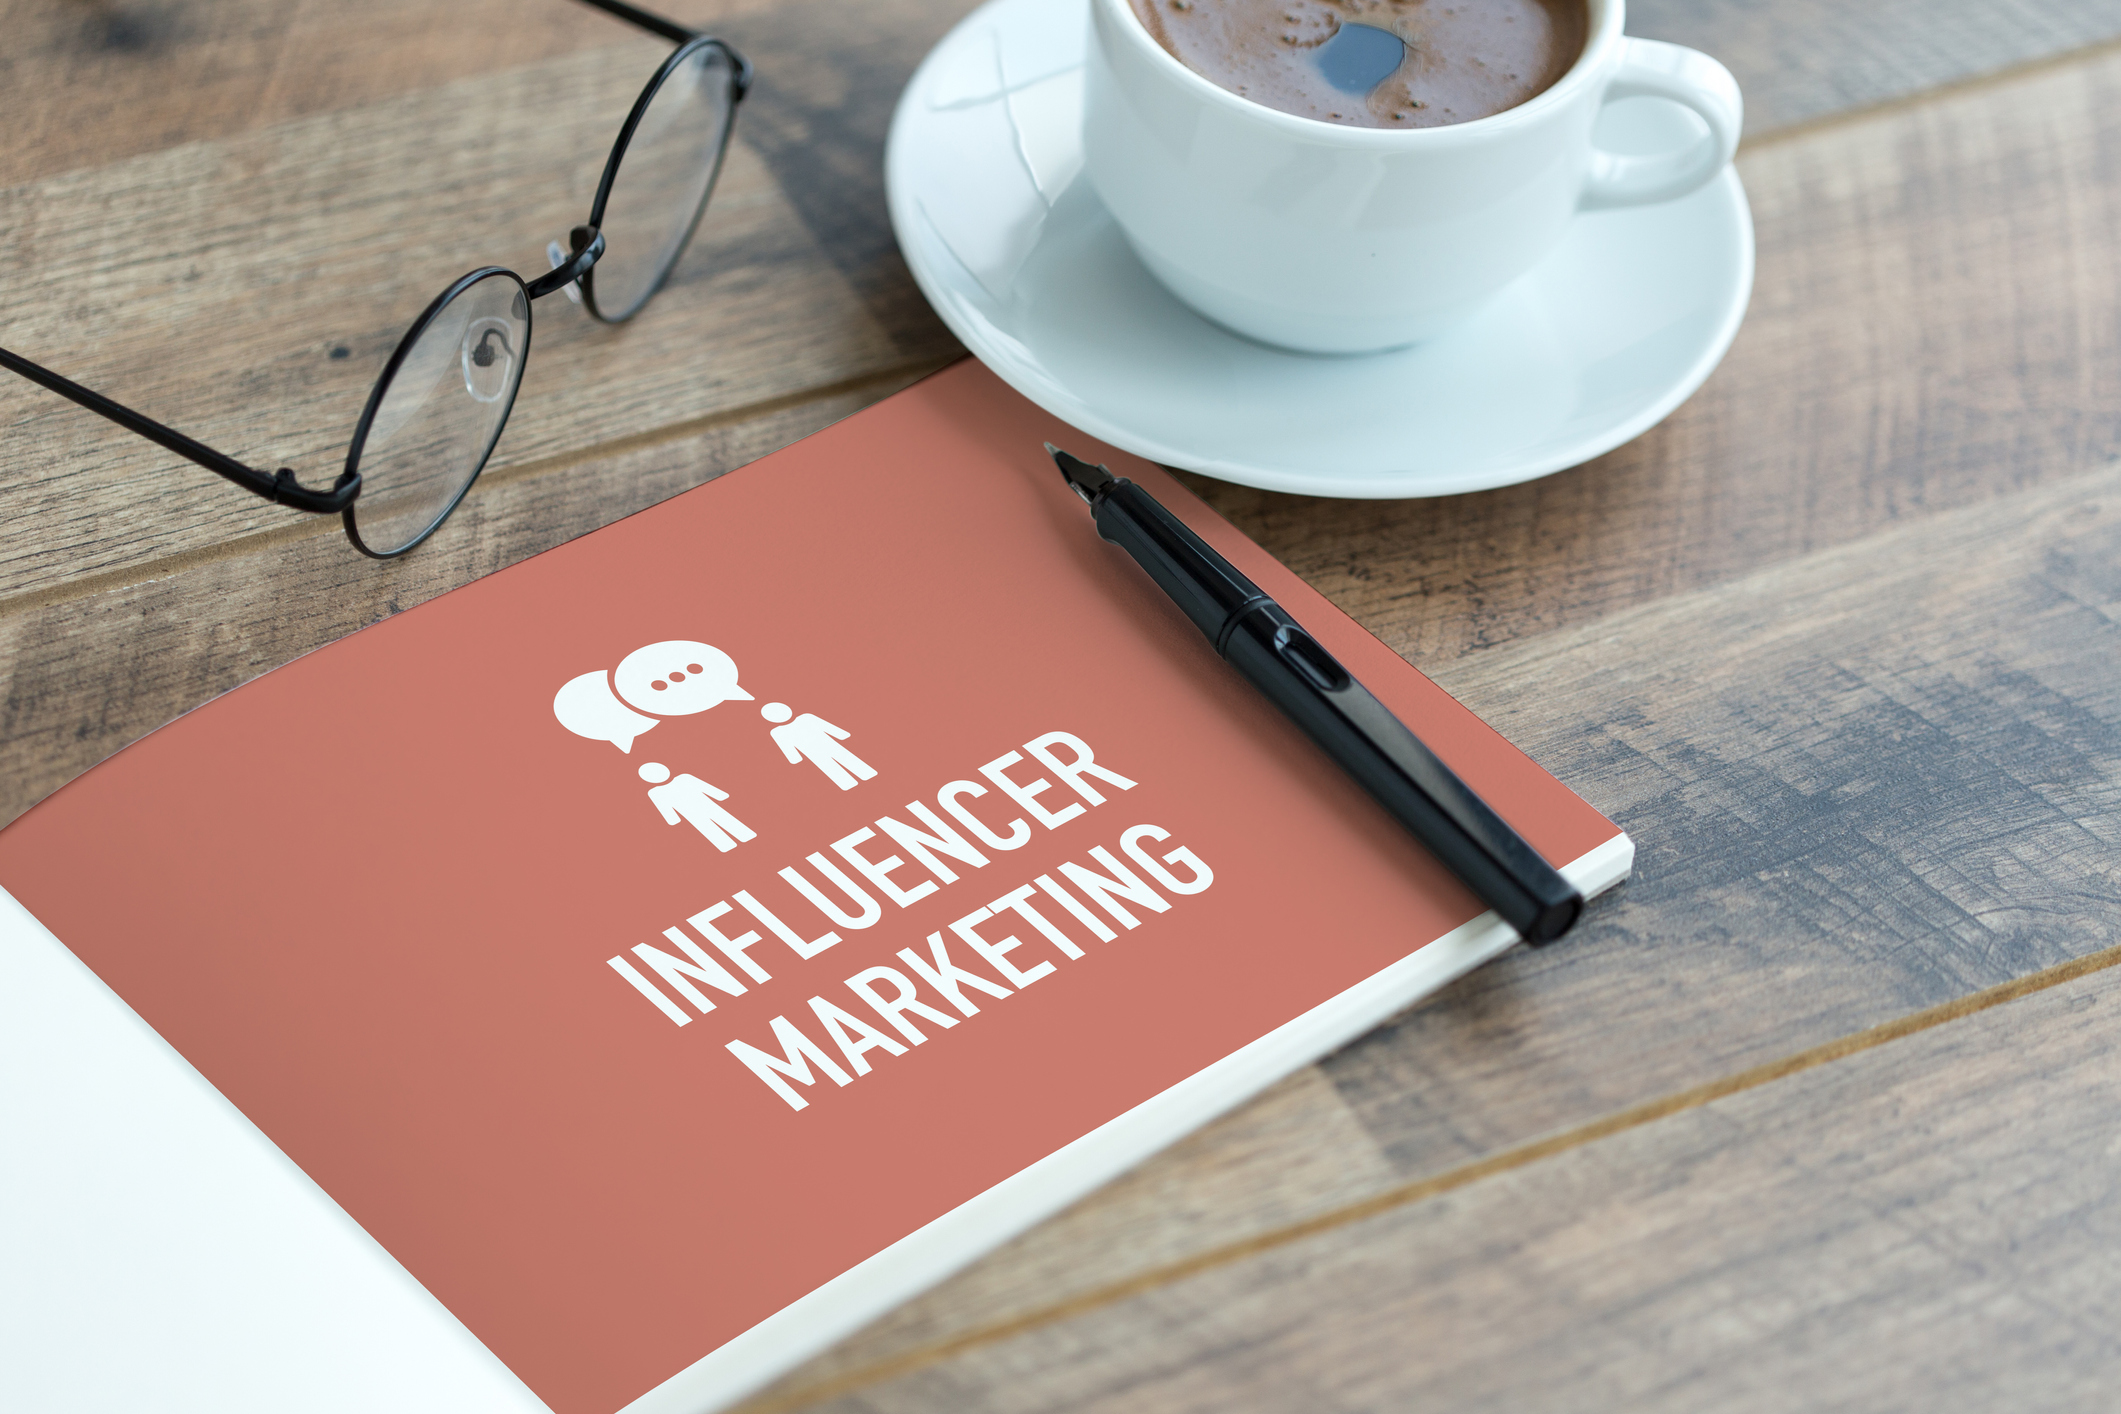 Marketing booklet with pen and coffee